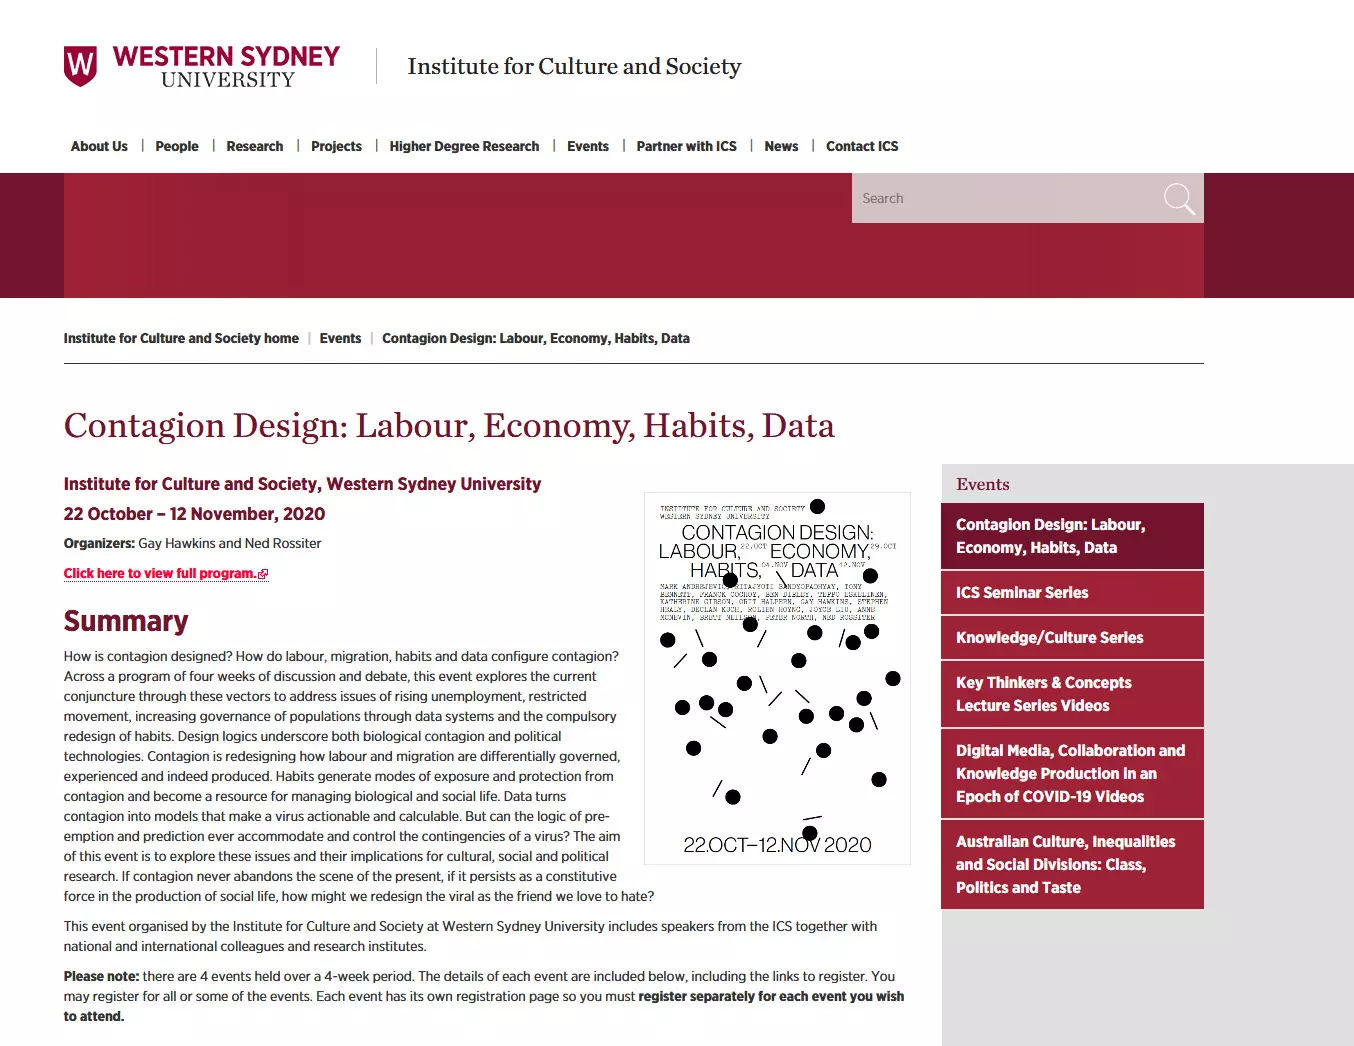 Symposium: Contagion Design: Labour, Economy, Habits, Data, 22 October – 12 November, 2020  Hosted by Institute for Culture and Society, Western Sydney University